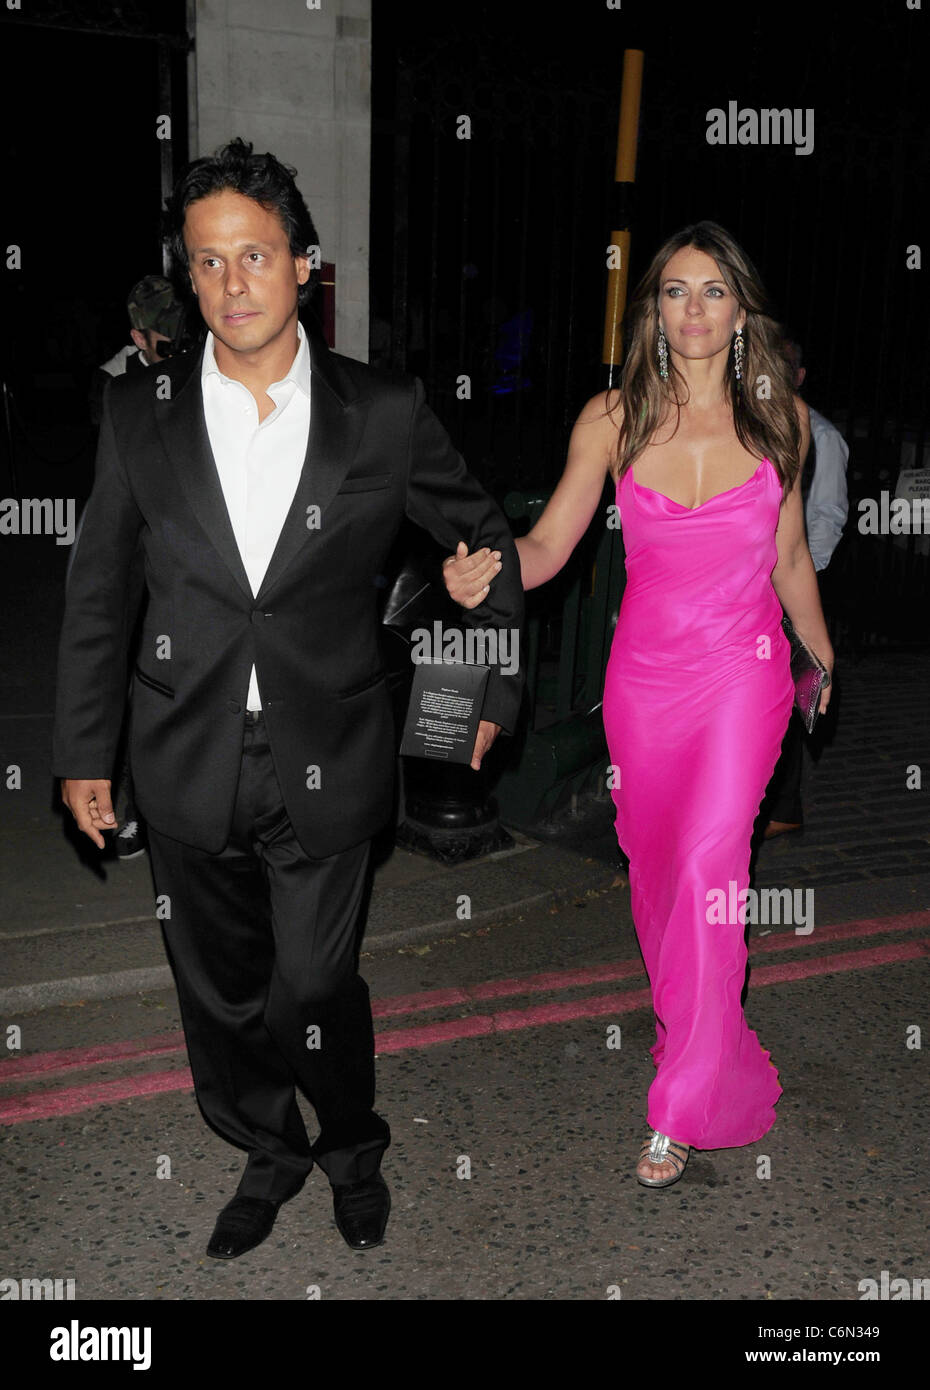 Liz Hurley and Arun Nayar Elephant Parade - auction held at the Royal Hospital Chelsea - departures London, England - 30.06.10 Stock Photo